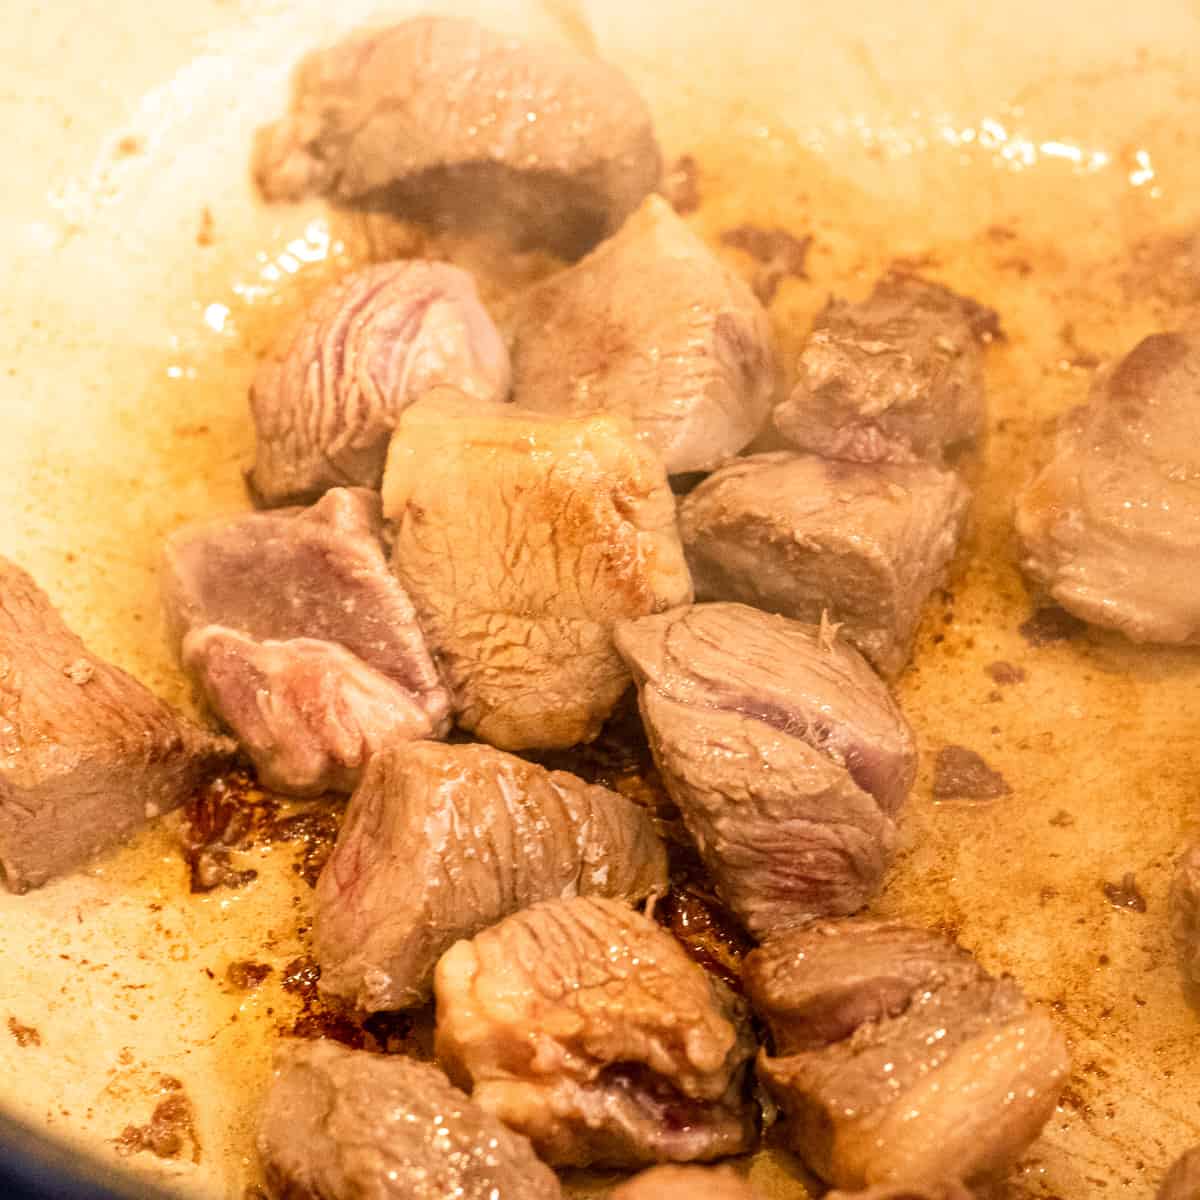 diced lamb pieces are browning in a dutch oven